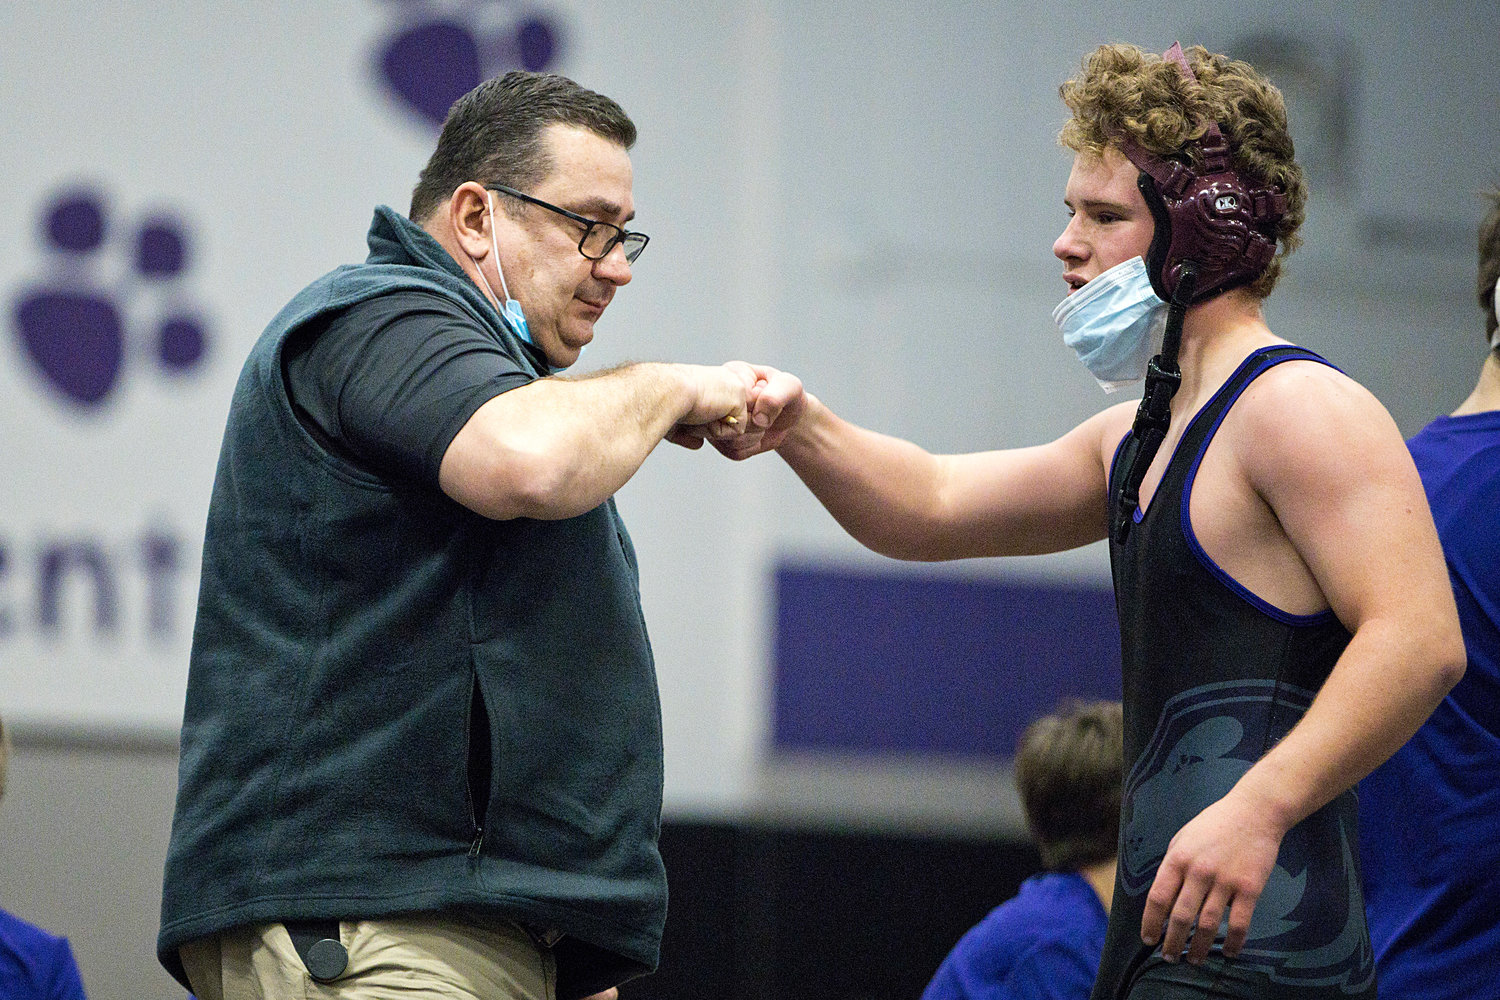 Huskies new head coach Mike Perreira gives a fist bump to James Thibaudeau after his match on Saturday.